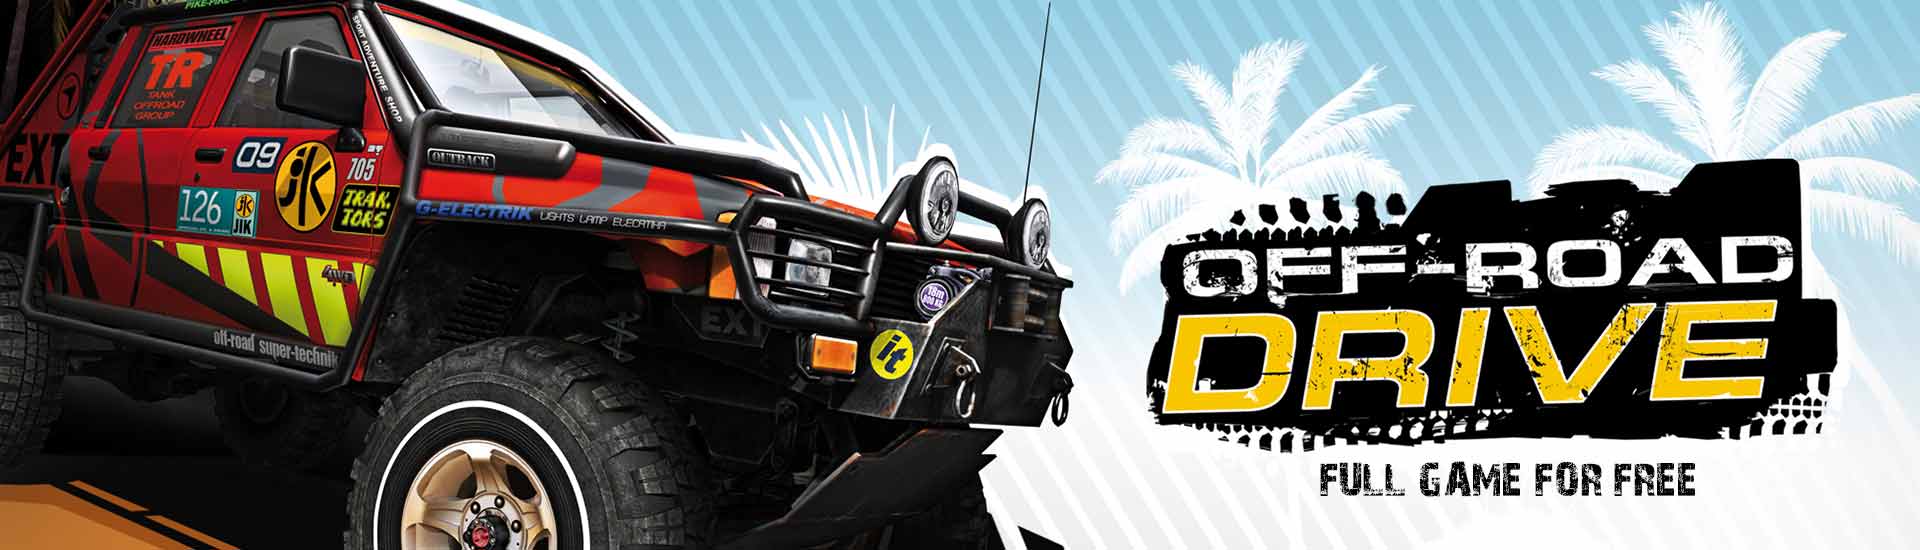 off-road-drive-(indiegala-game)